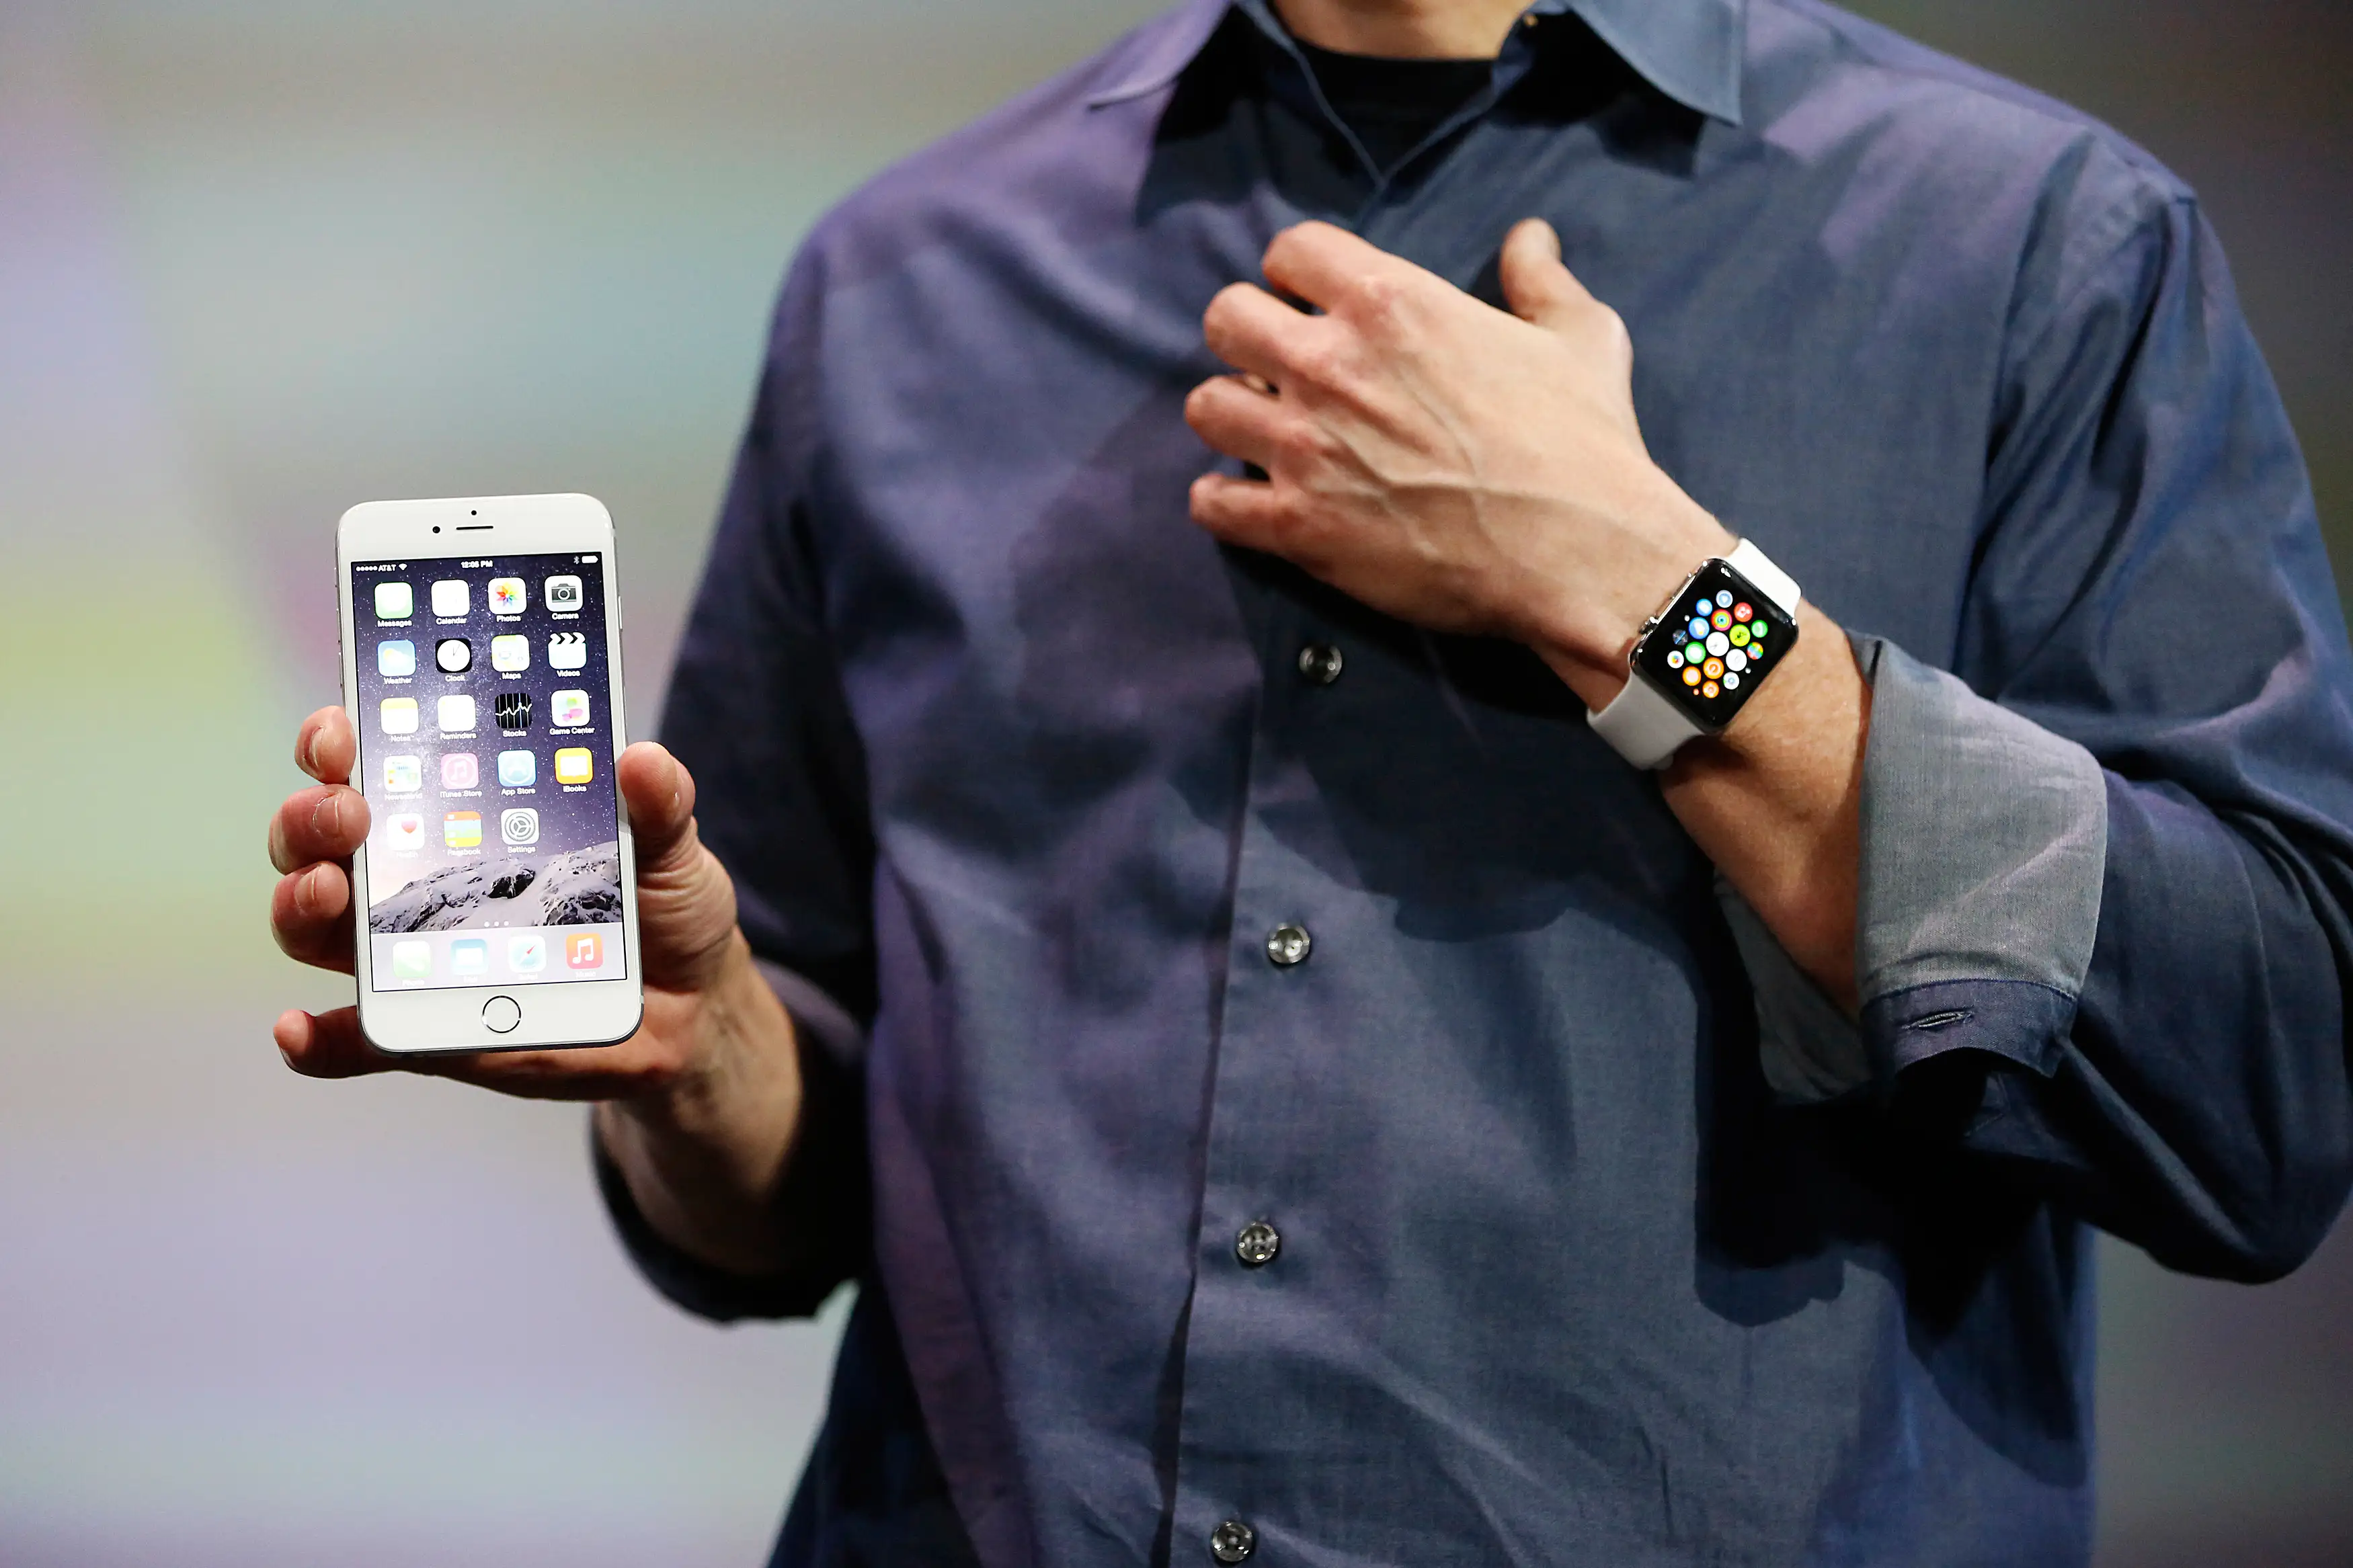 Apple CEO Tim Cook wears the Apple Watch and shows the iPhone 6 Plus during an Apple event at the Flint Center in Cupertino, California, September 9, 2014.